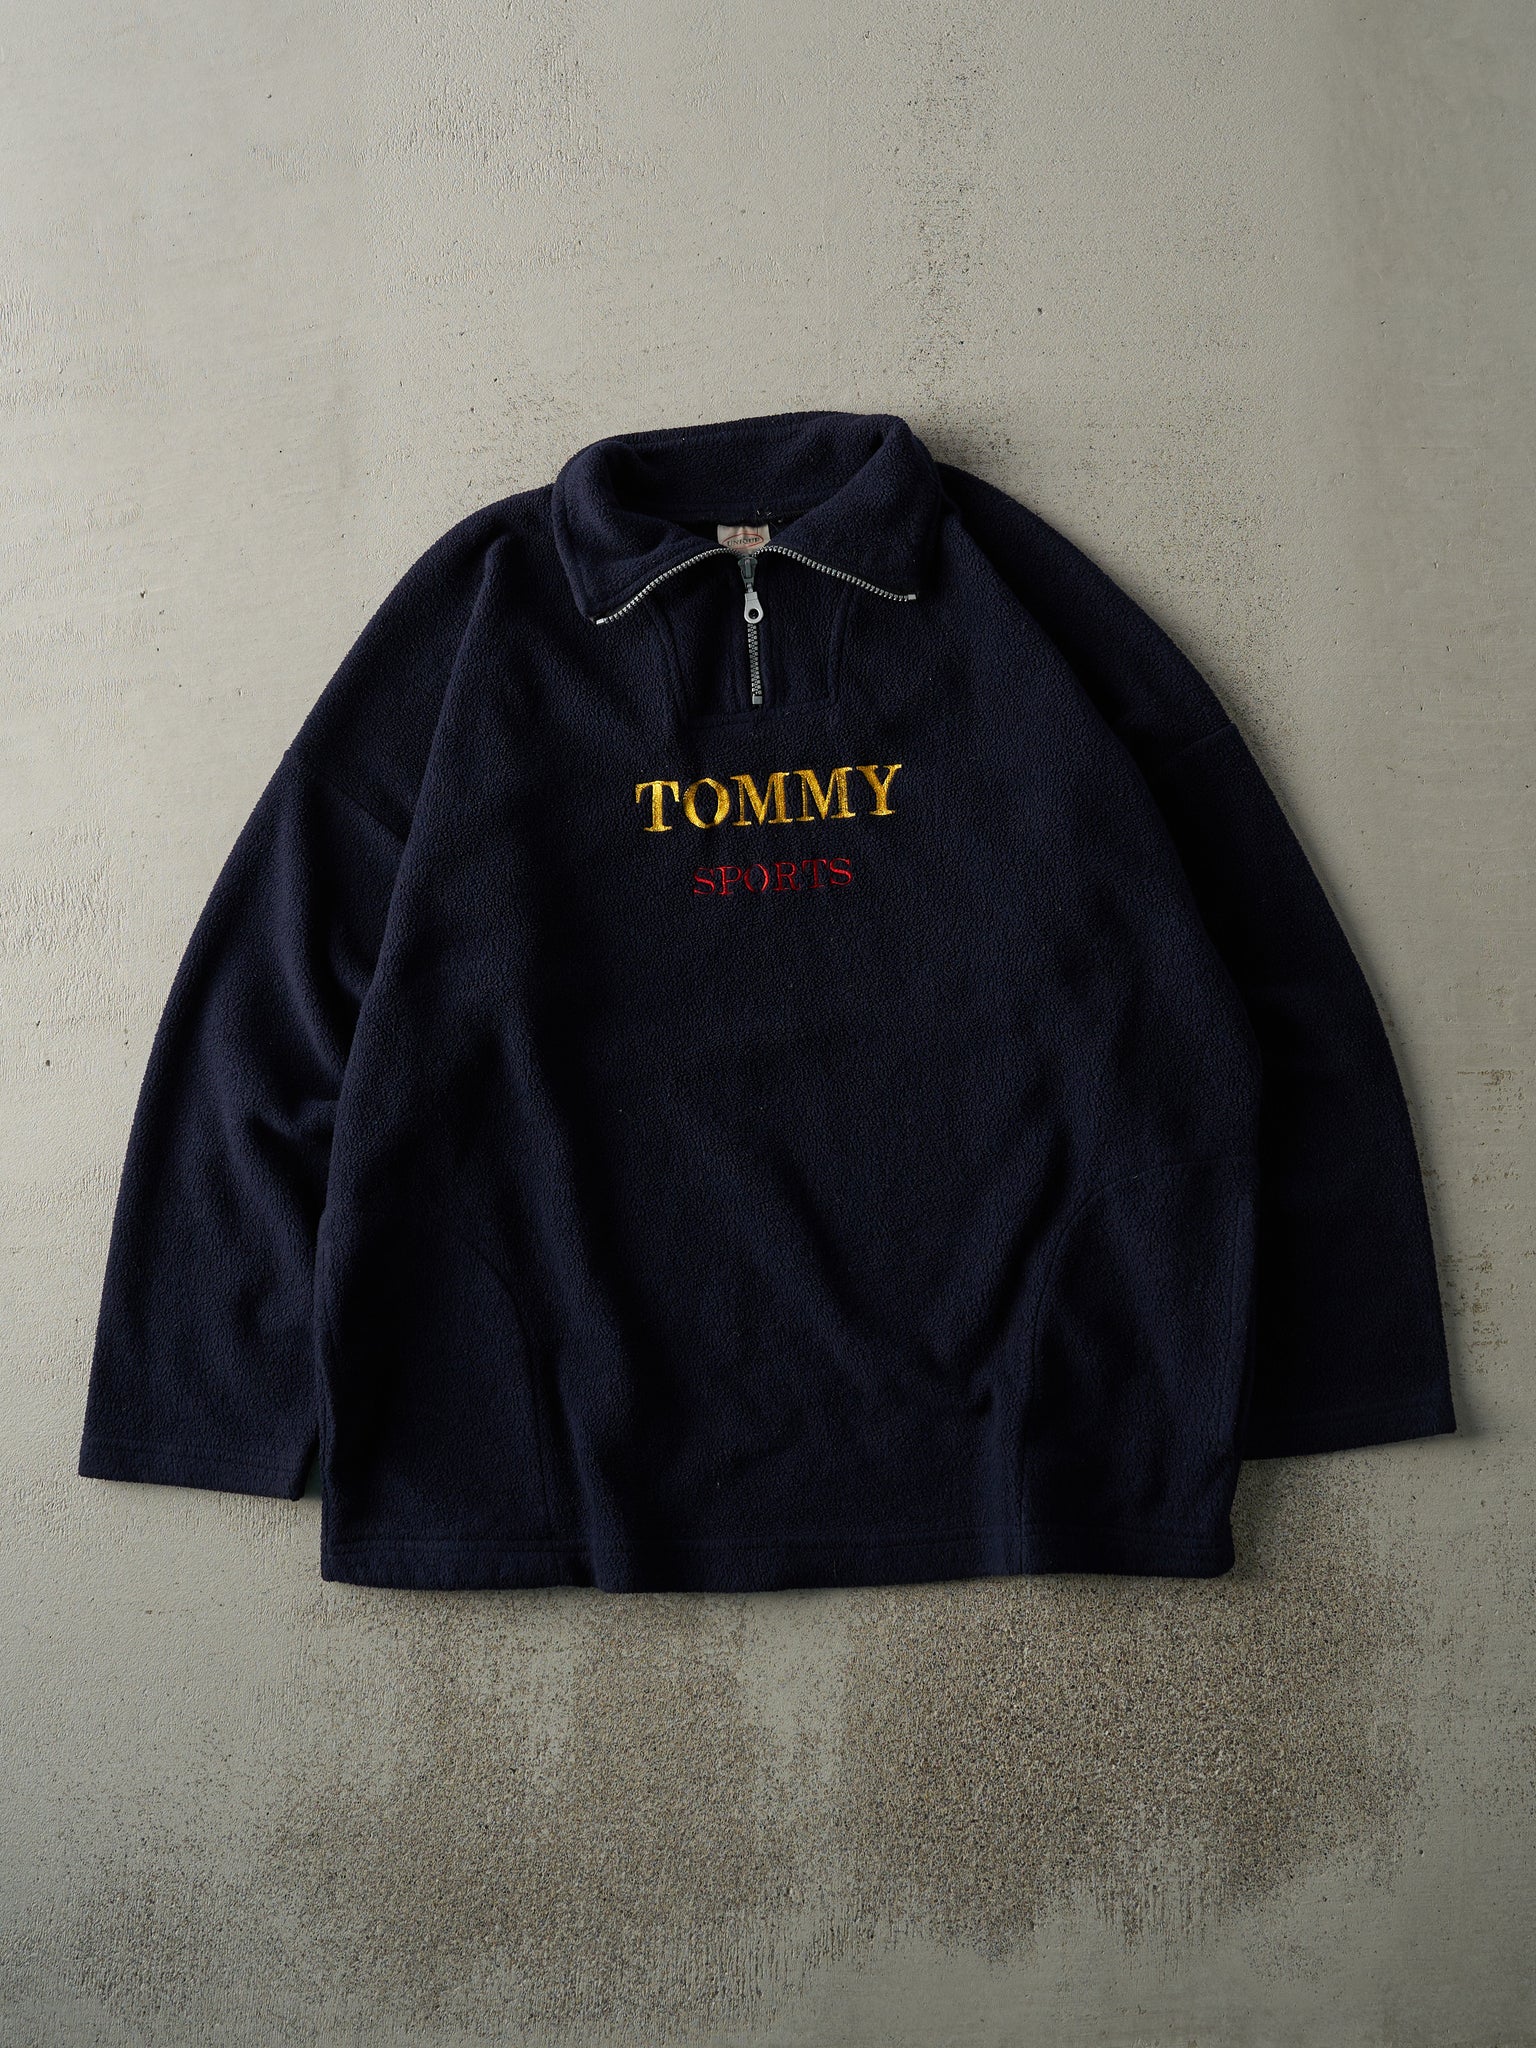 Vintage 90s Navy Blue Embroidered Tommy Sports Bootleg Fleece Quarter Zip Sweater (XL)